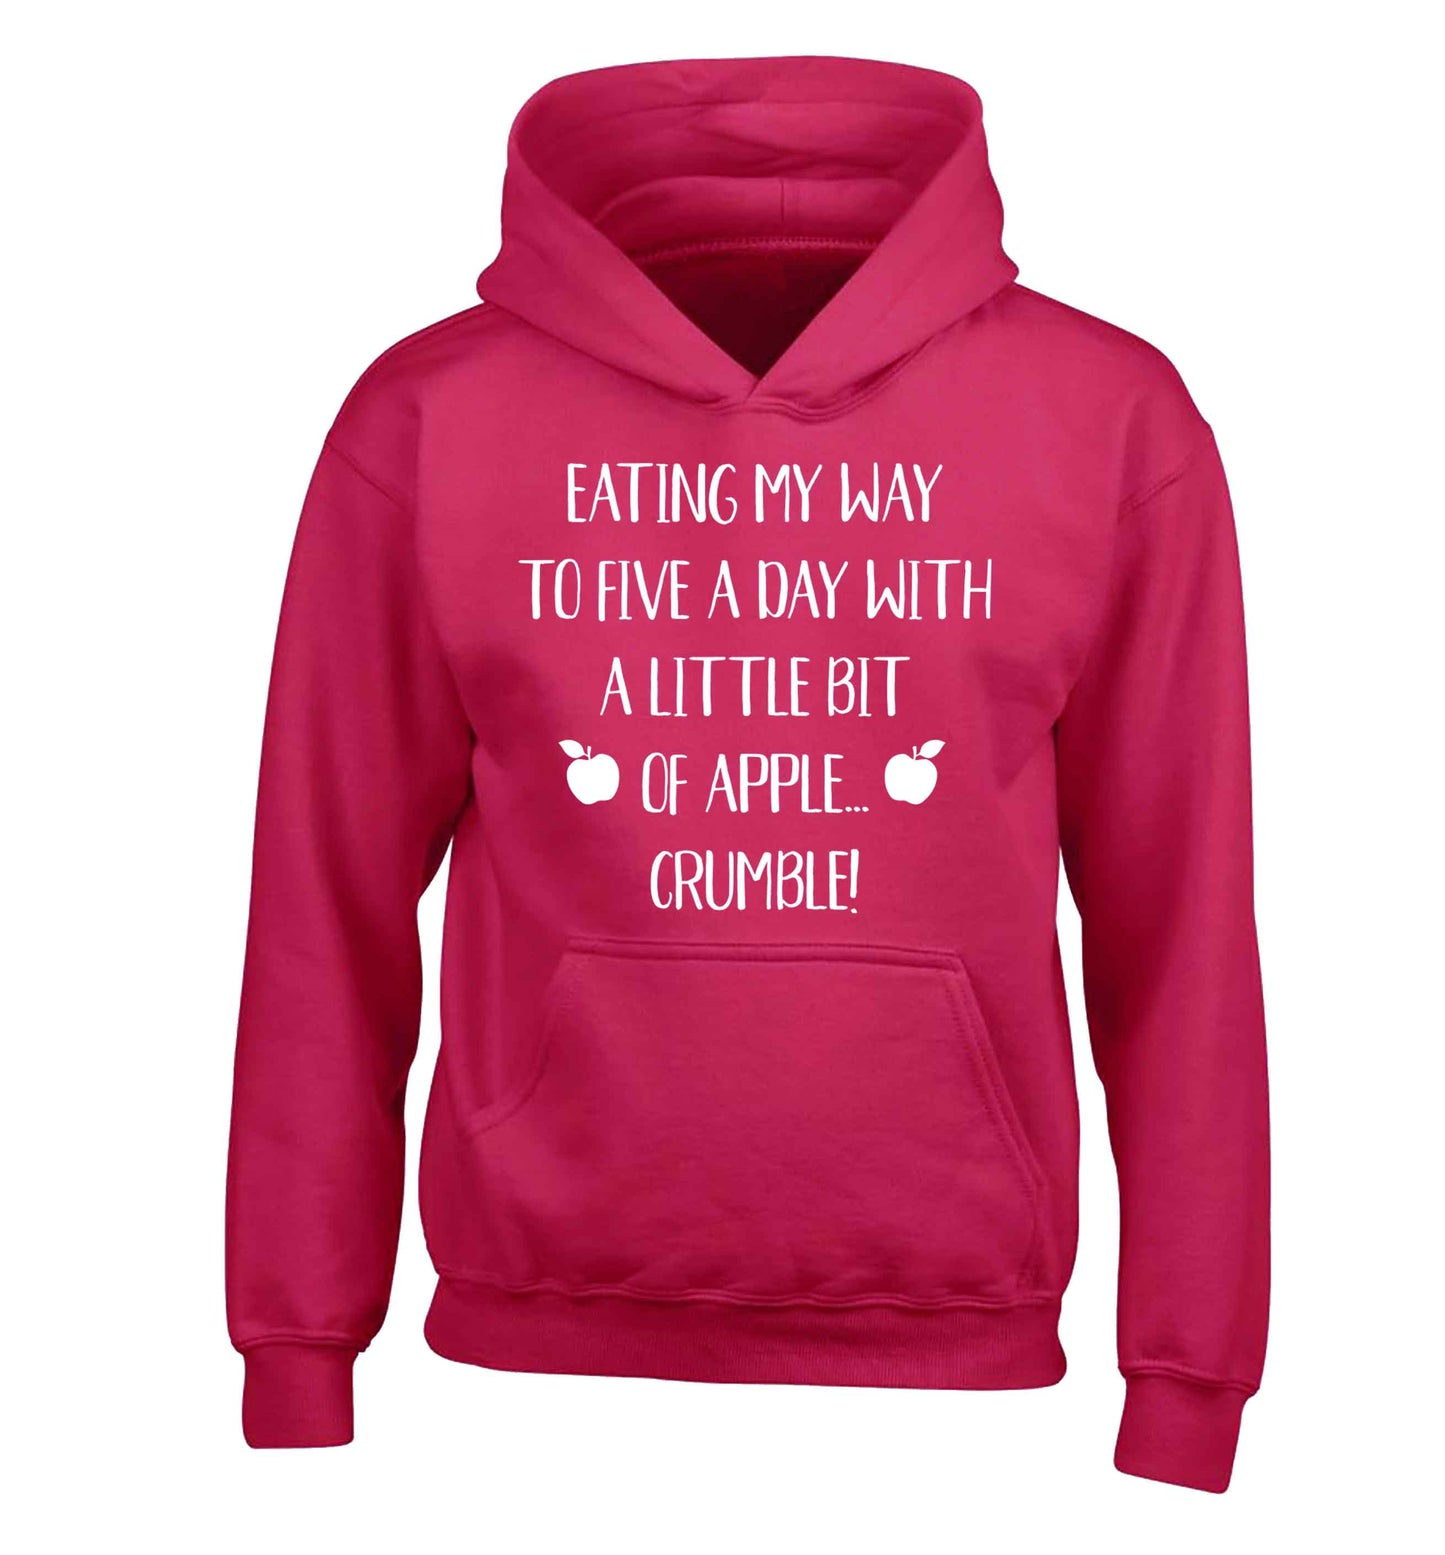 Eating my way to five a day with a little bit of apple crumble children's pink hoodie 12-13 Years